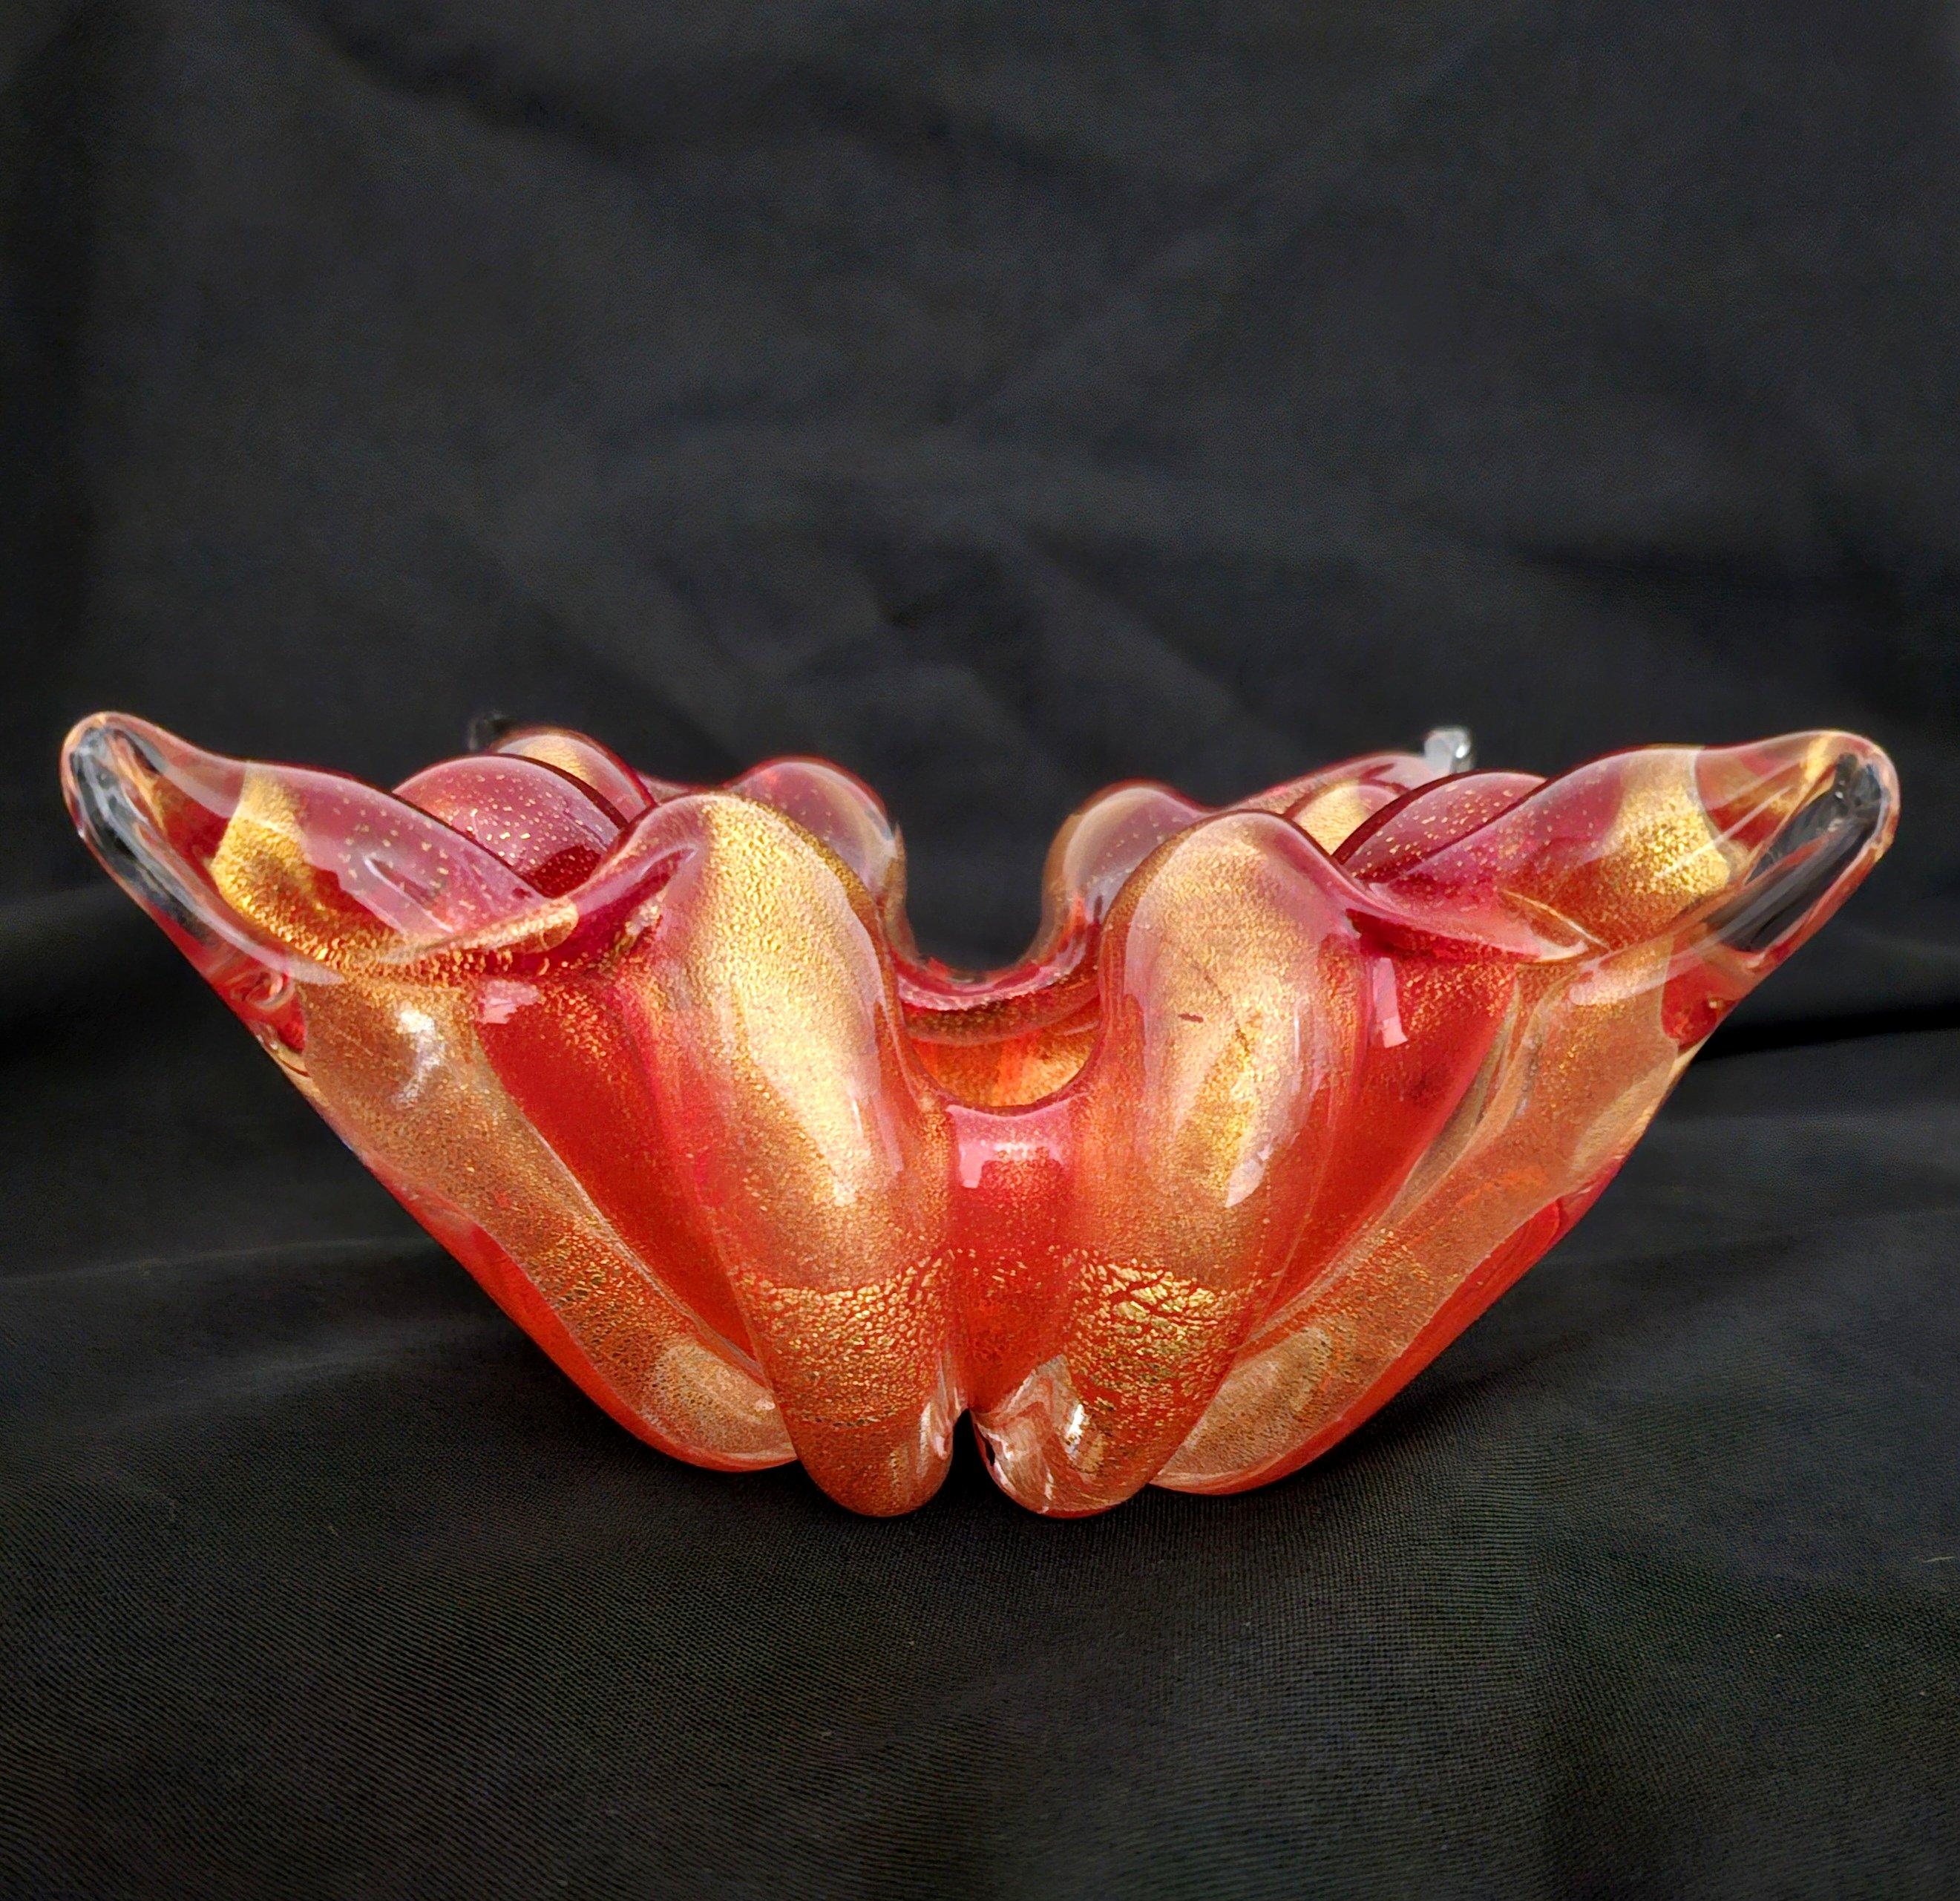 Murano Glass Ashtray, Red w/Gold Polveri / Gold Leaf, Barovier & Toso (assumed) For Sale 3